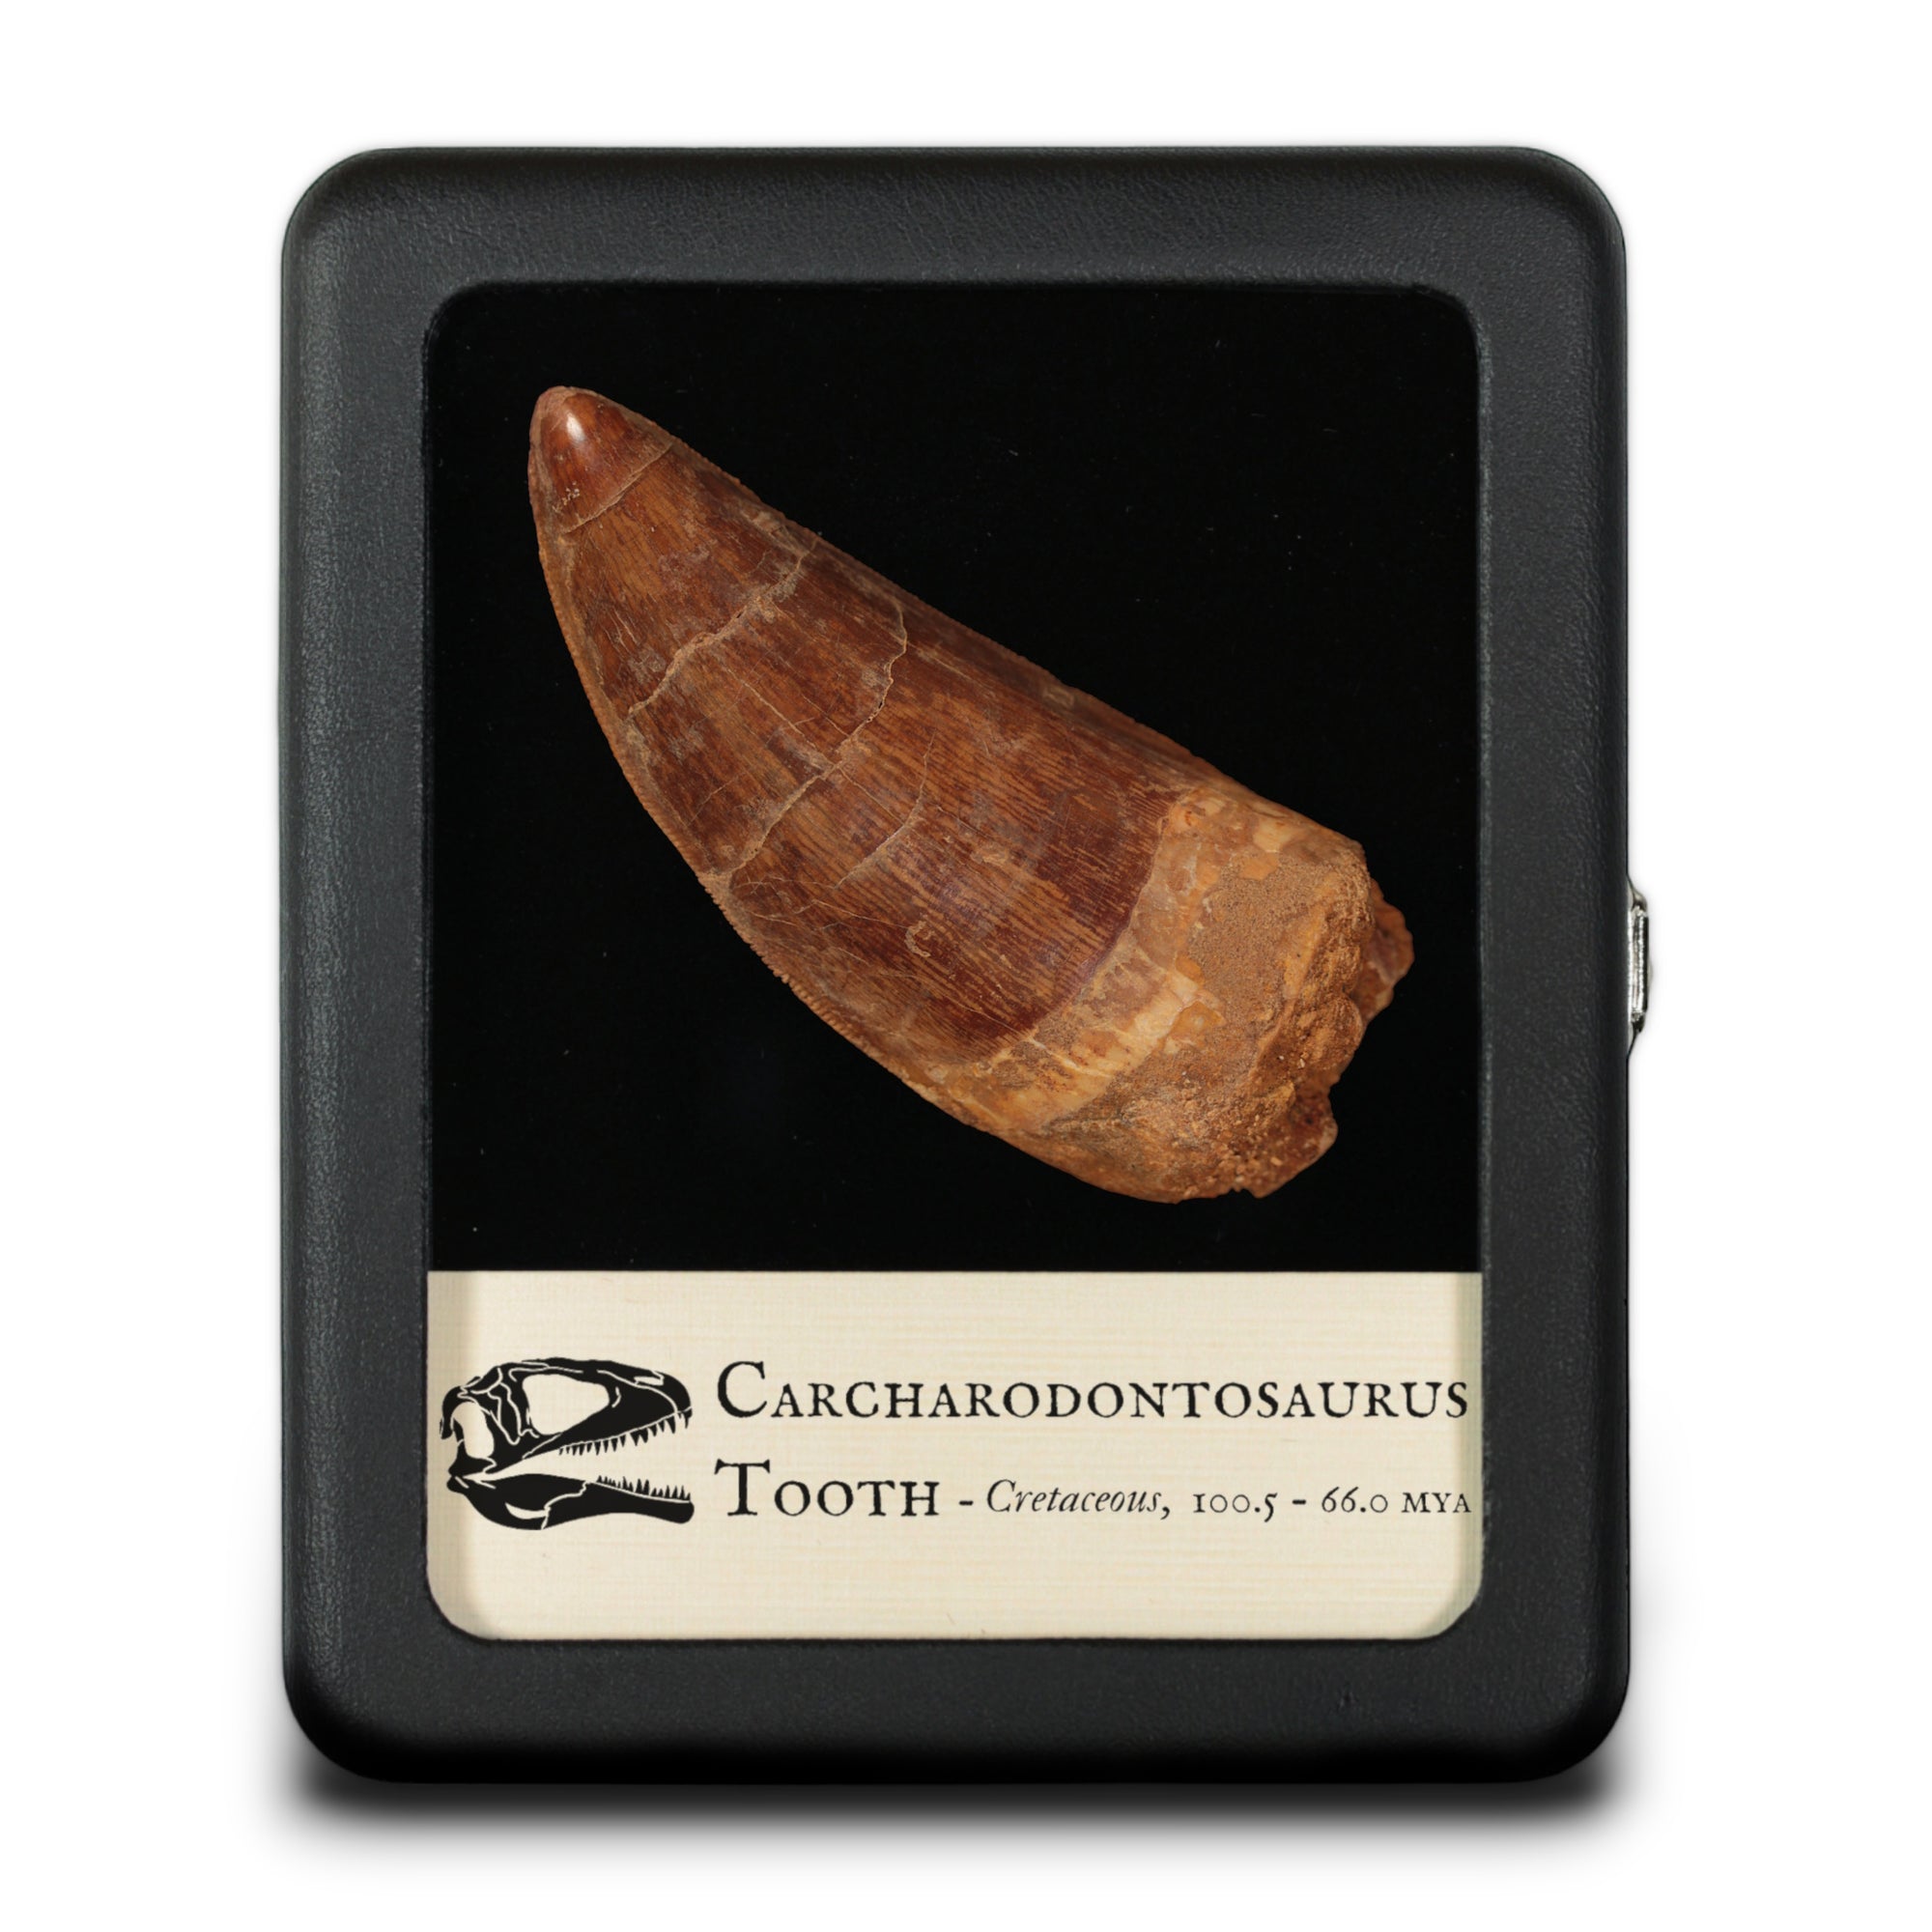 Large Carcharodontosaurus Tooth - Cretaceous Period - 100.5 to 66.0 MYA - Morocco